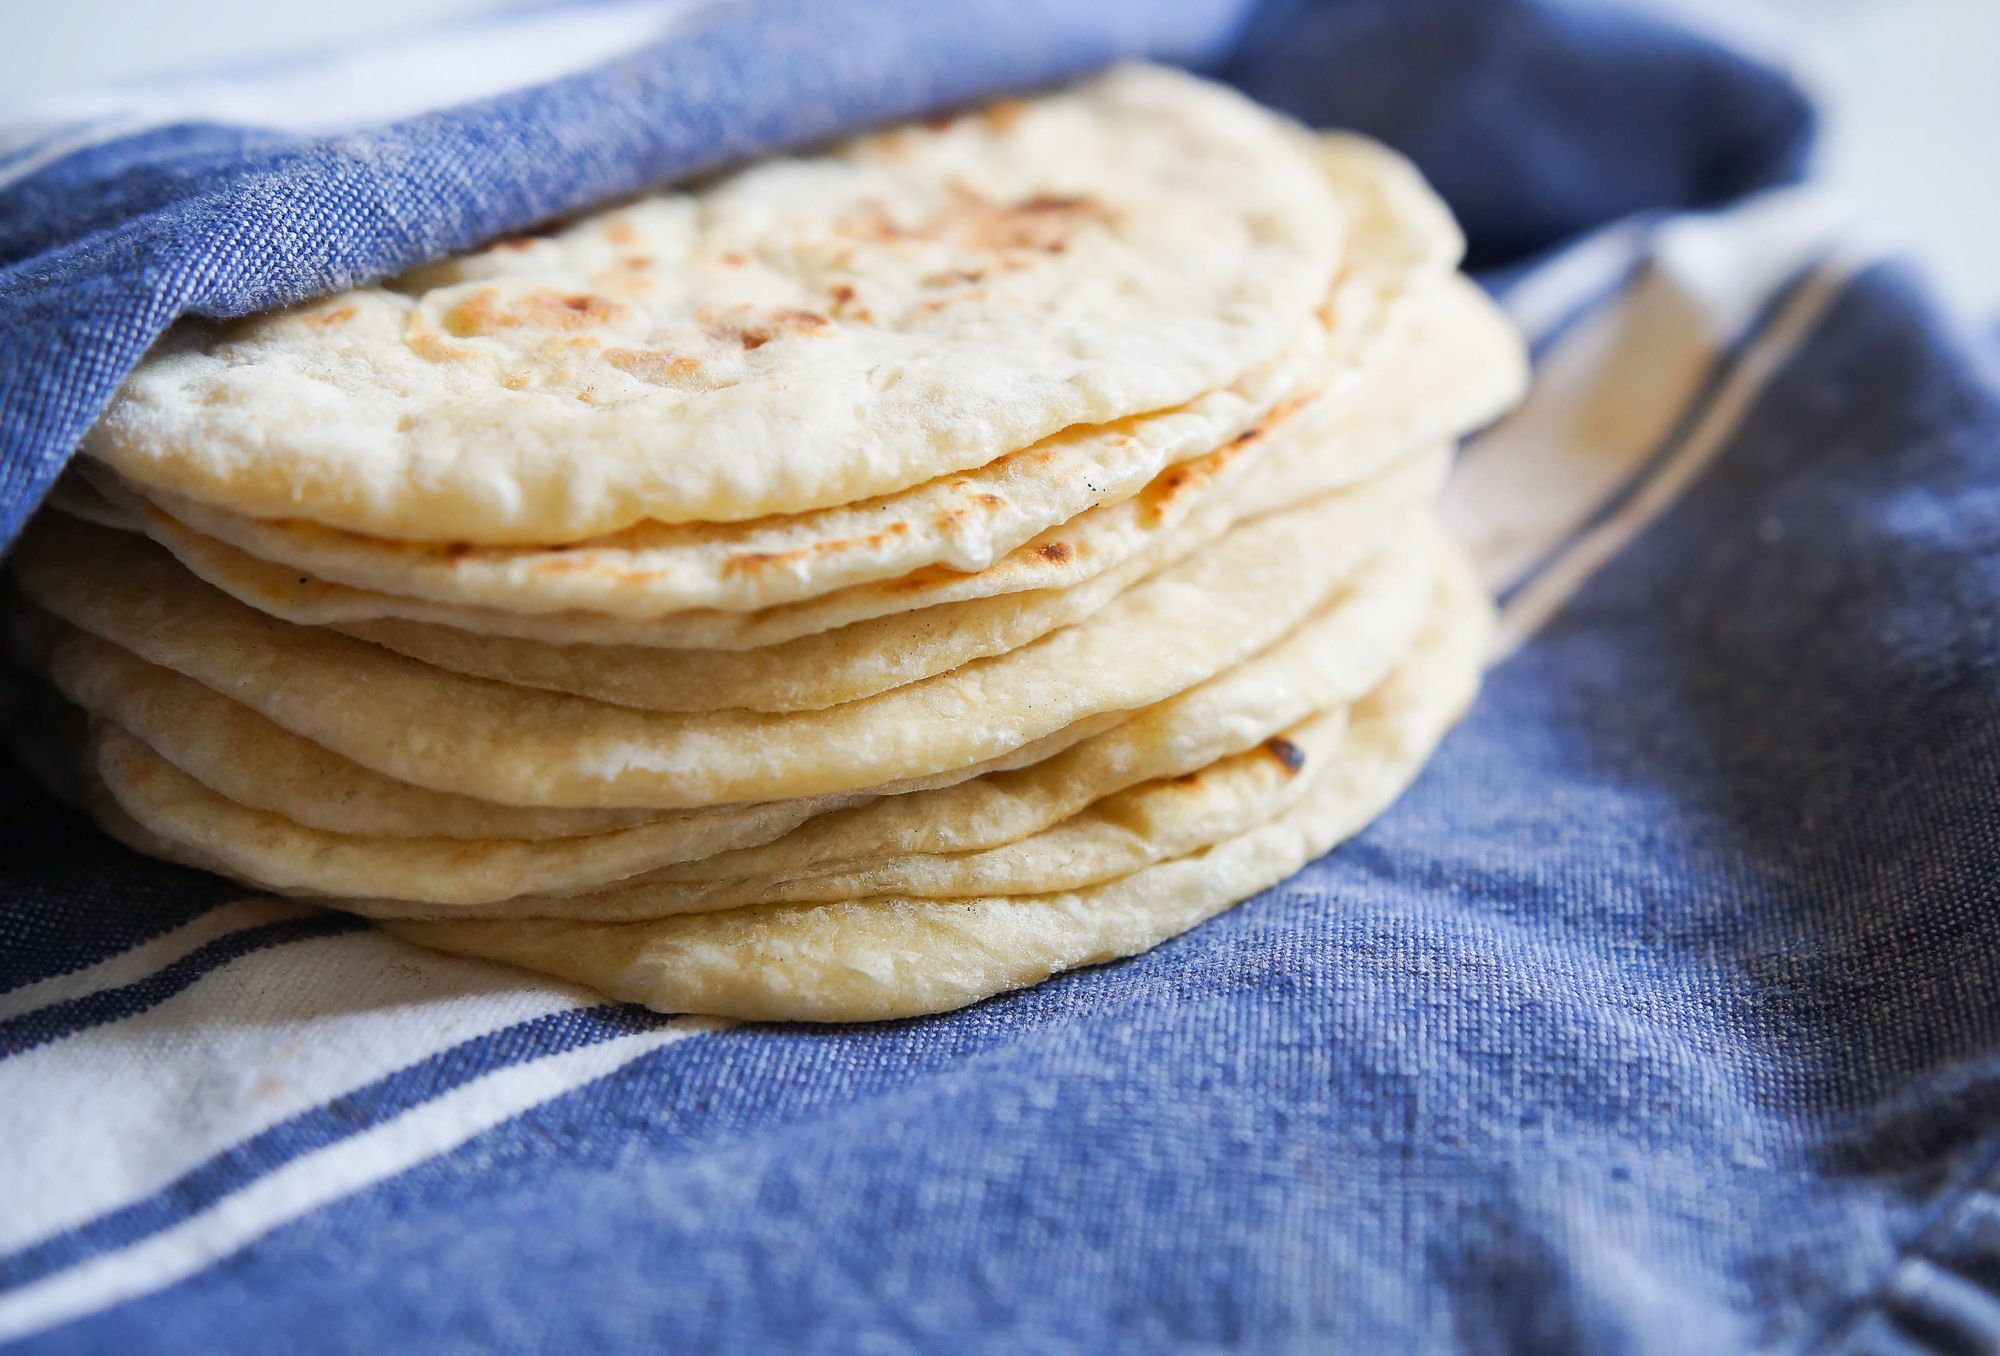 How to Make Tortillas